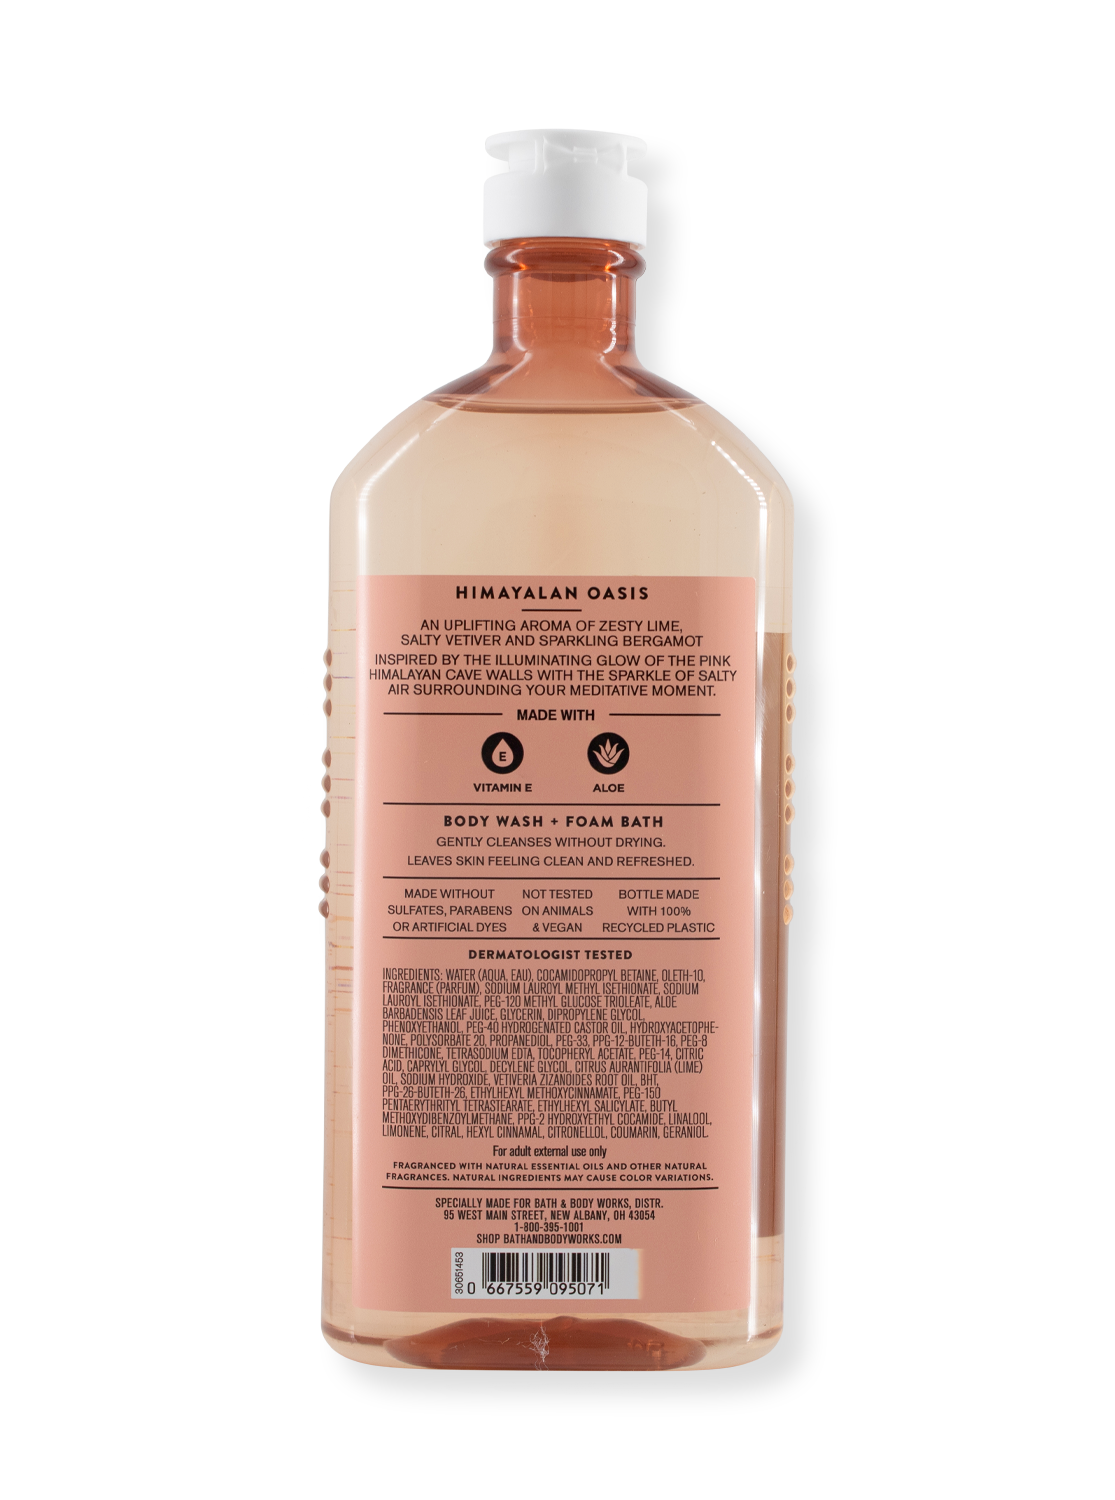 Douchegel & bubbelbad - Aroma - Himalayan Oasis - Lime Vetiver - 295ml